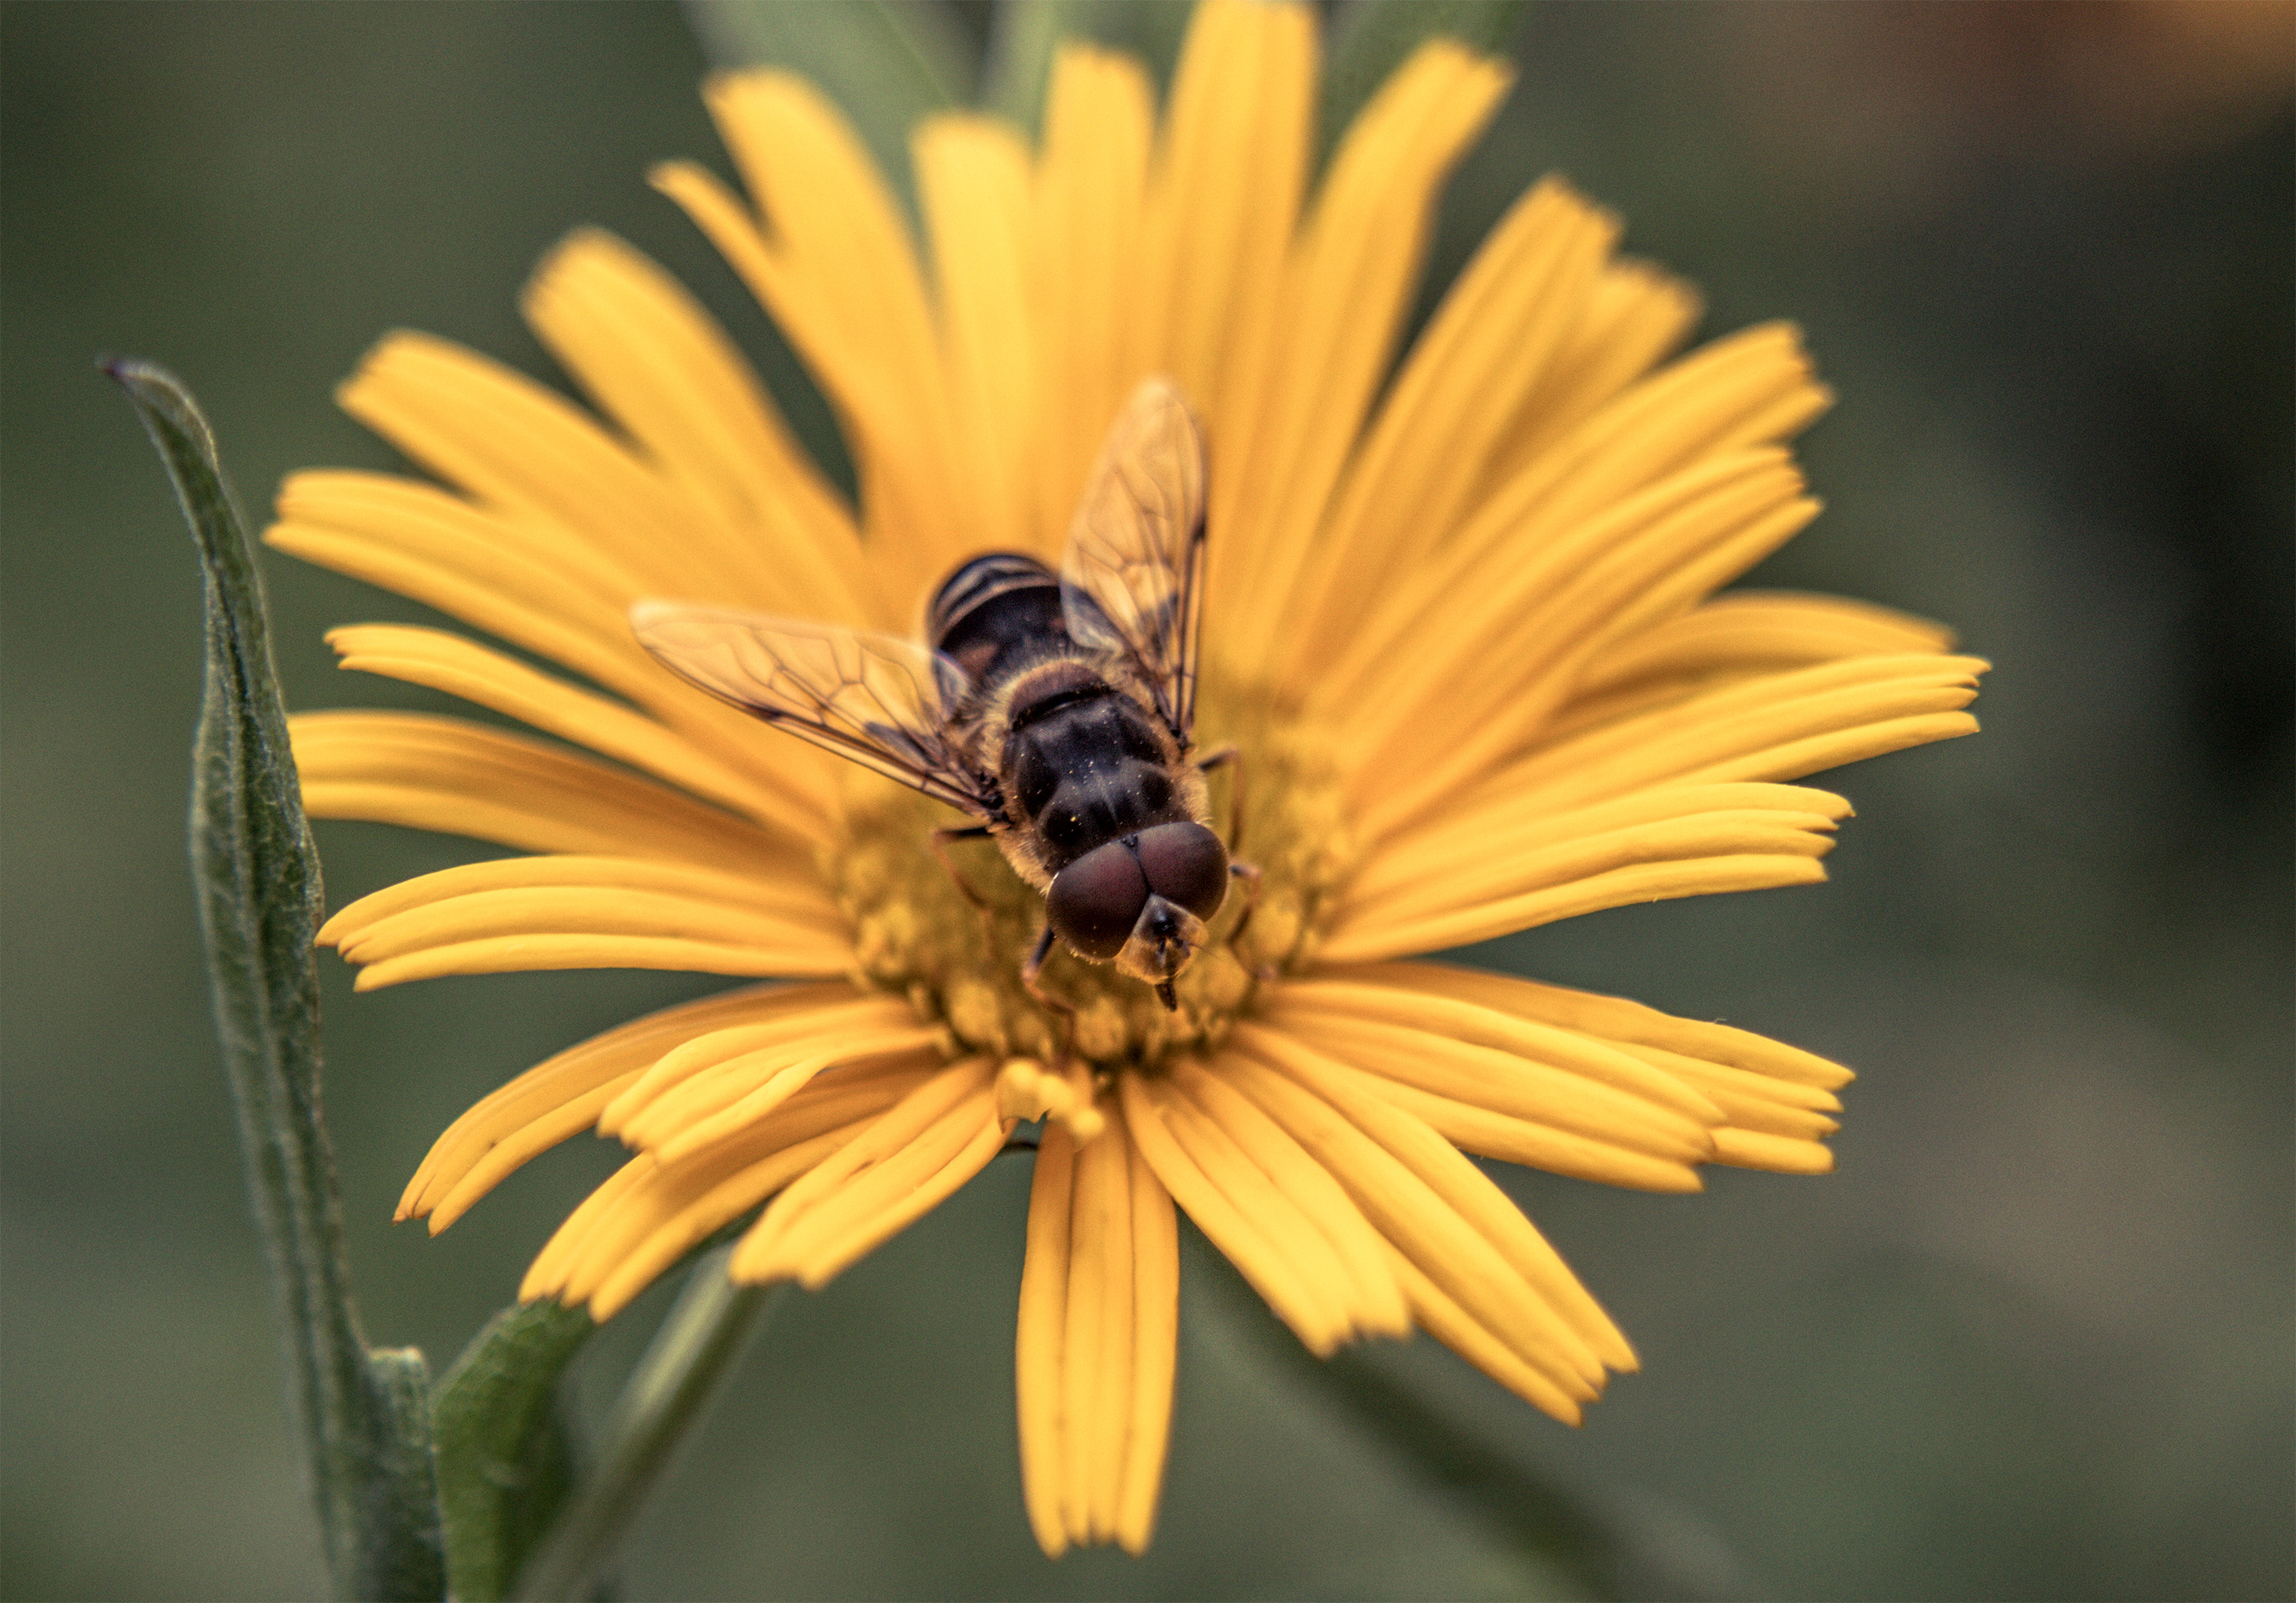 Bee on a flower, Bee, Flower, Insect, Macro, HQ Photo